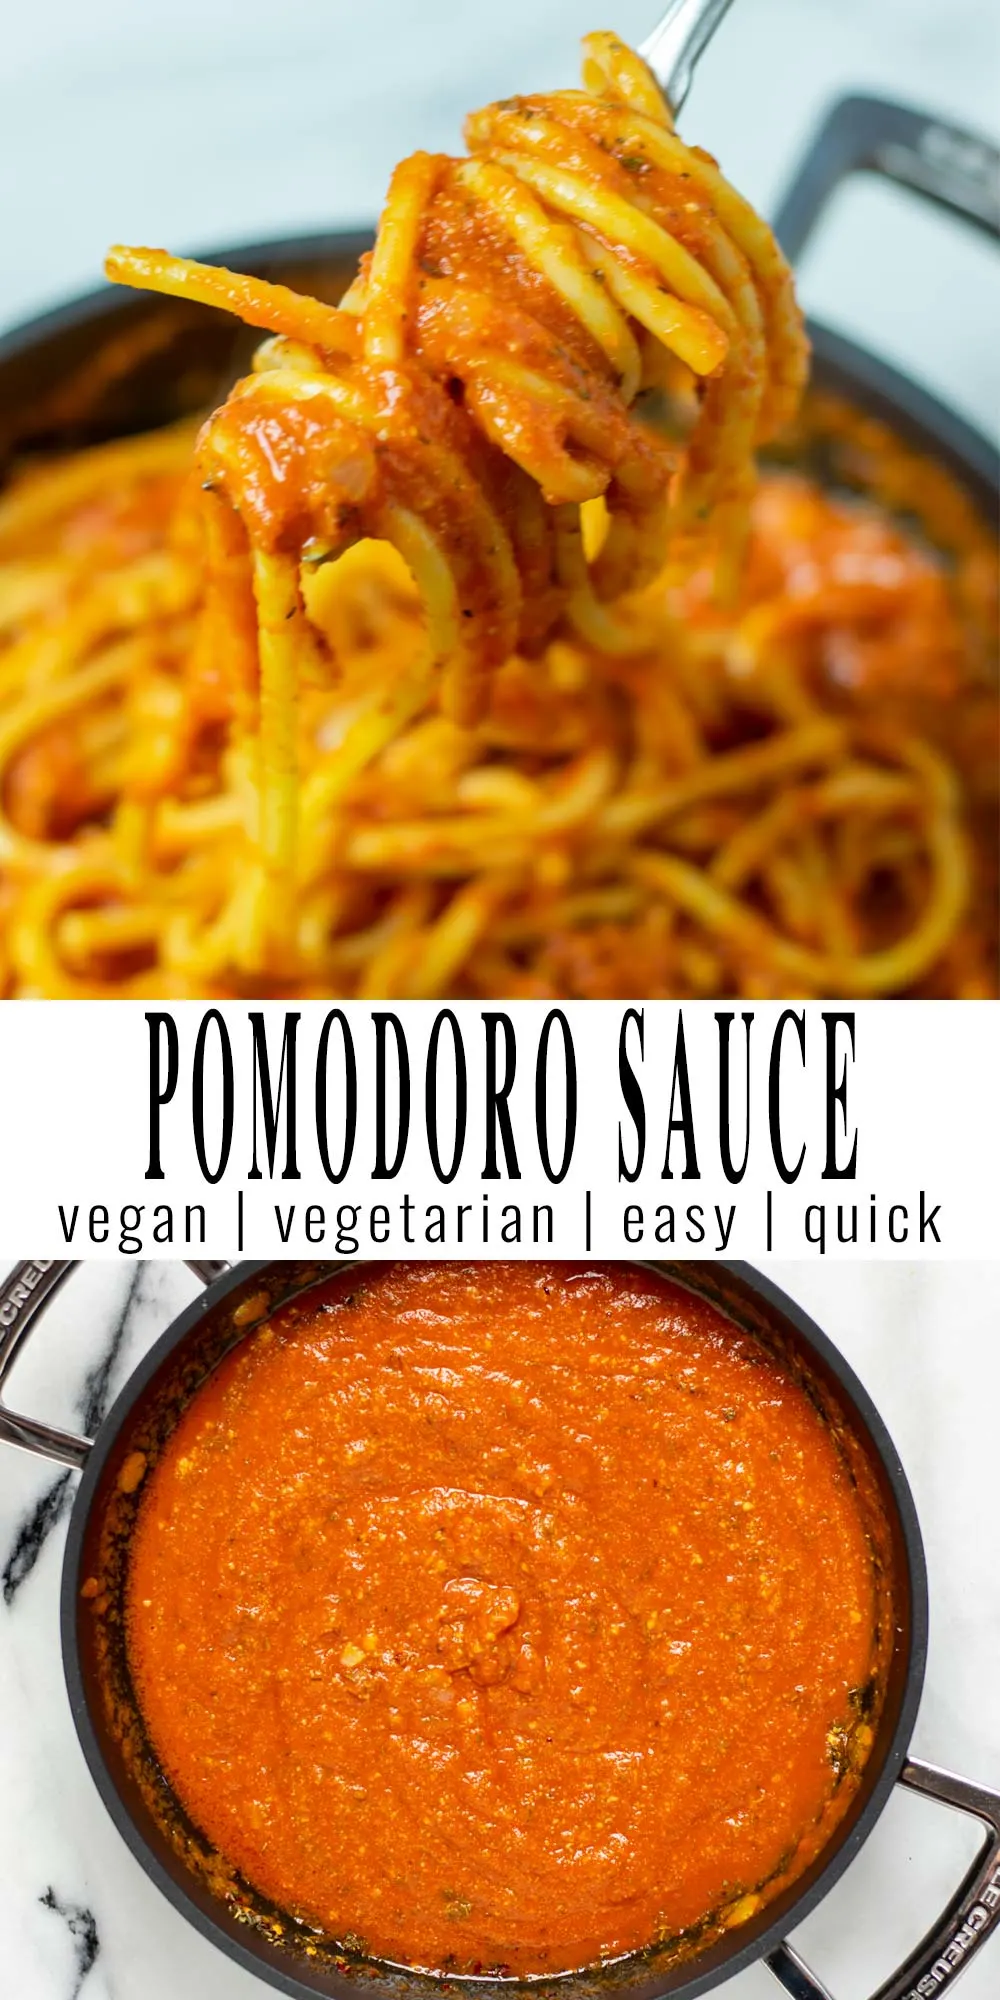 Collage of two pictures of the Pomodoro Sauce with recipe title text.